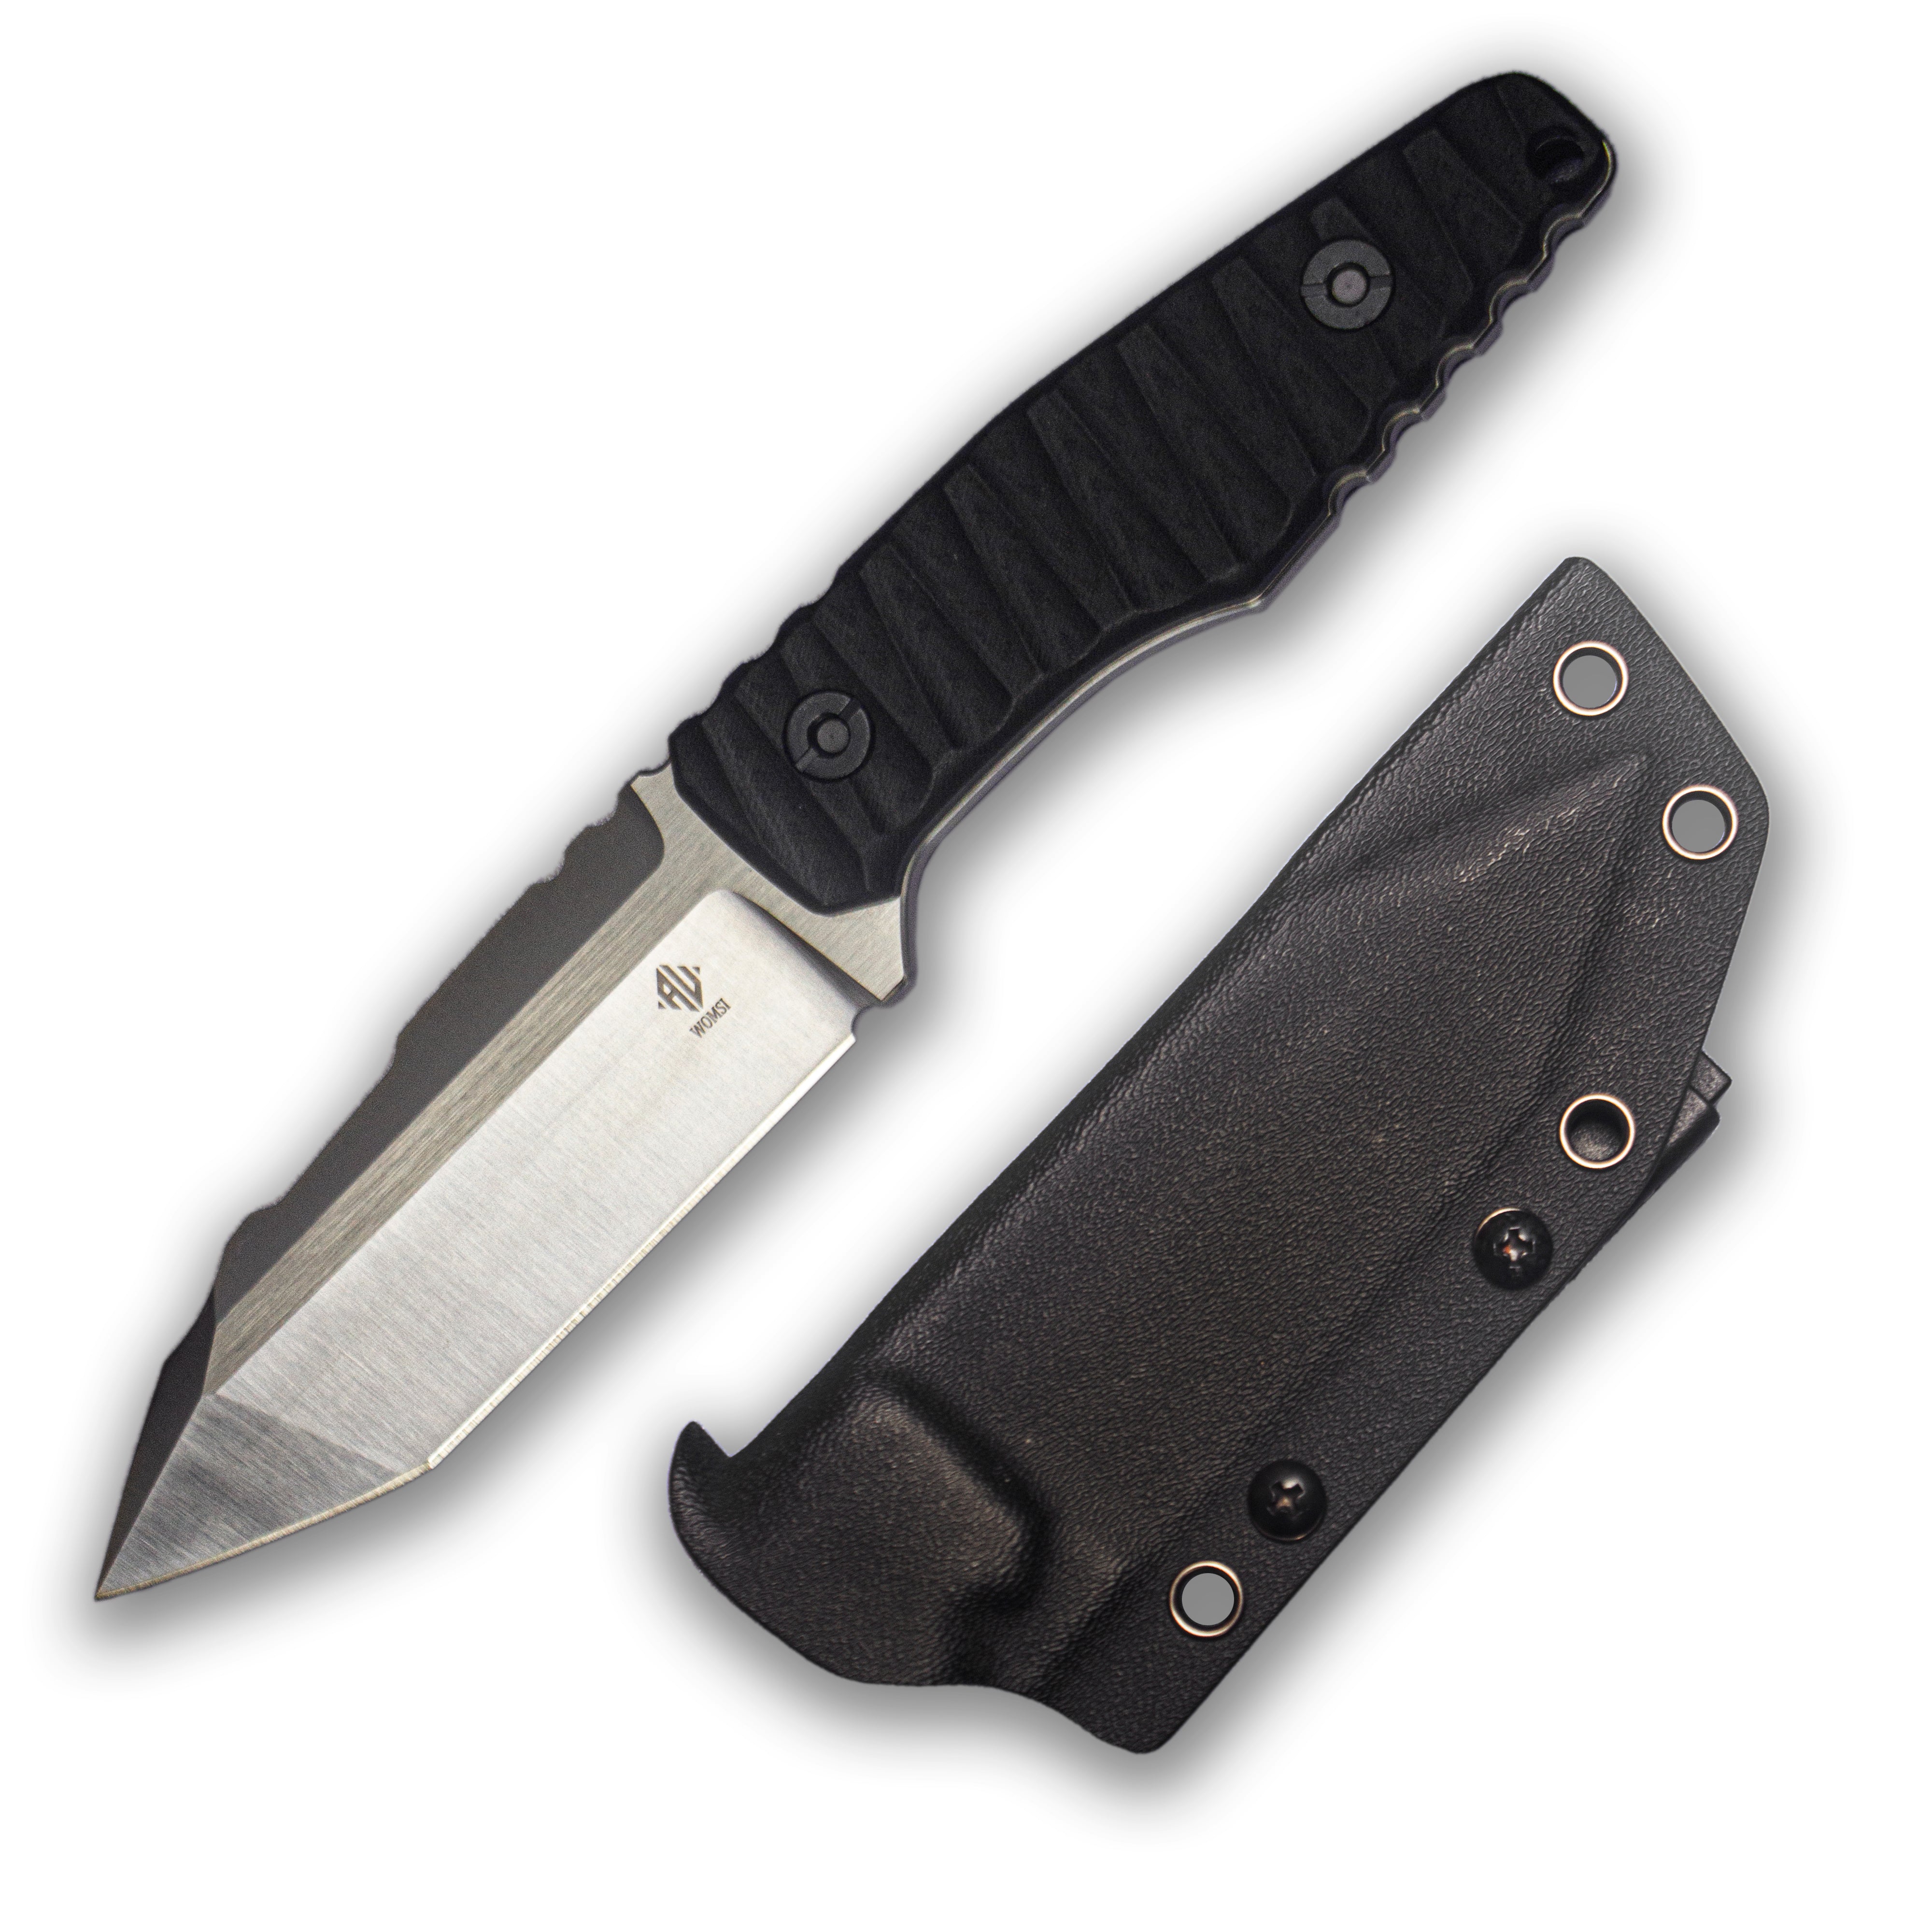 WOMSI BOCK Pocket HUNTING KNIFE,ALFKNIVES Survival Camping Tactical,Full tang 7” Stainless Steel Hunting Knife with Kydex Sheath